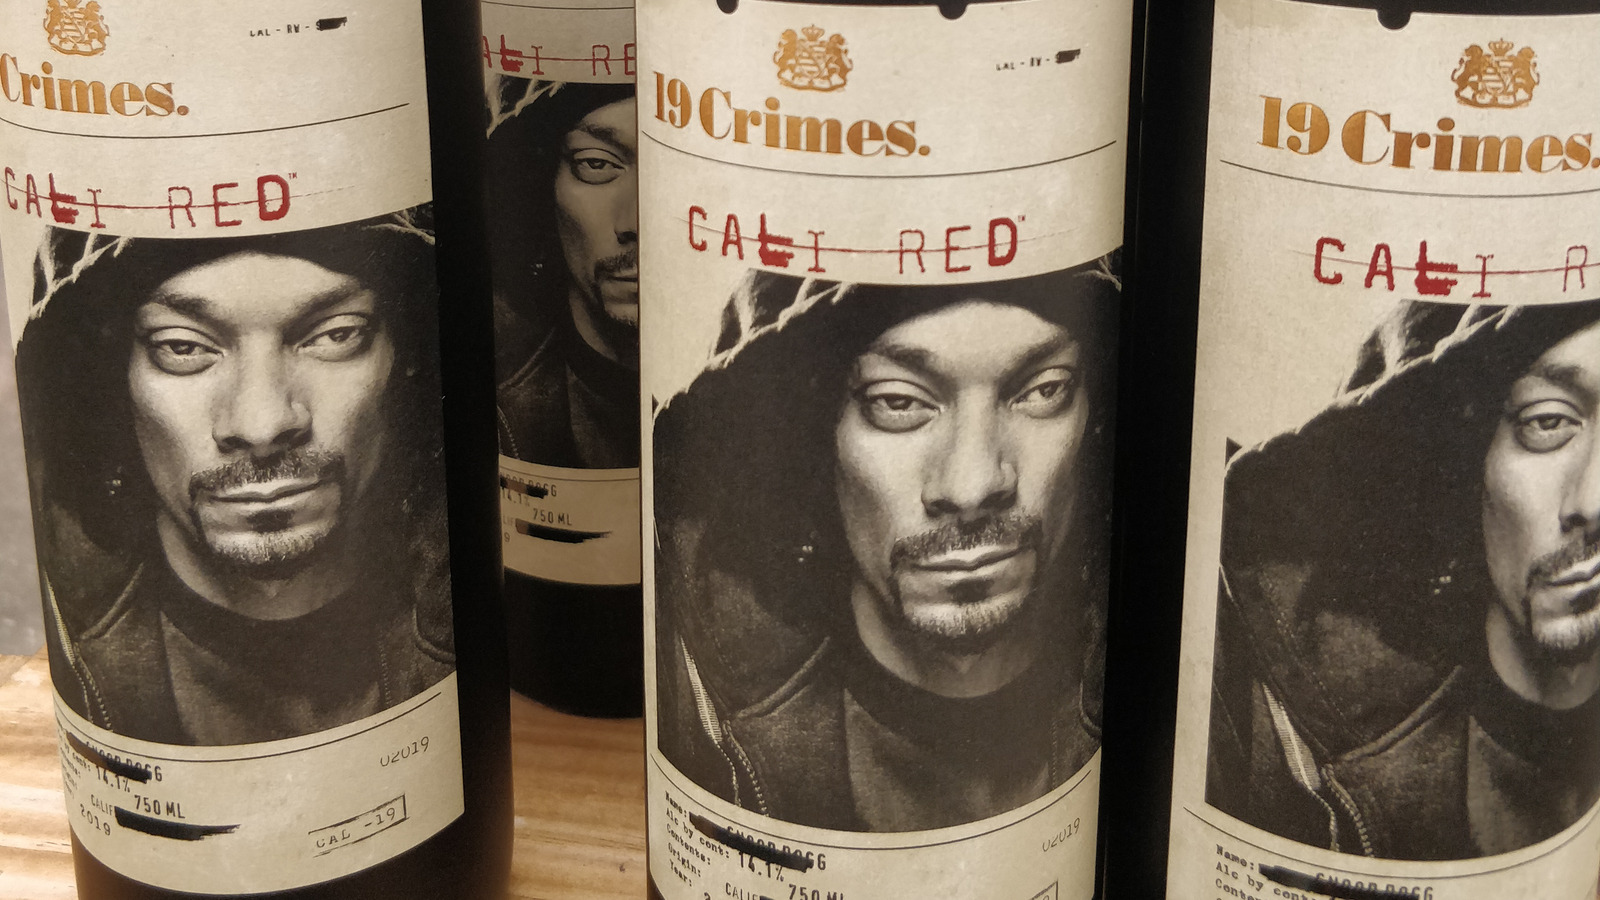 19 Crimes Snoop Dogg Cali Red: The Ultimate Bottle Guide